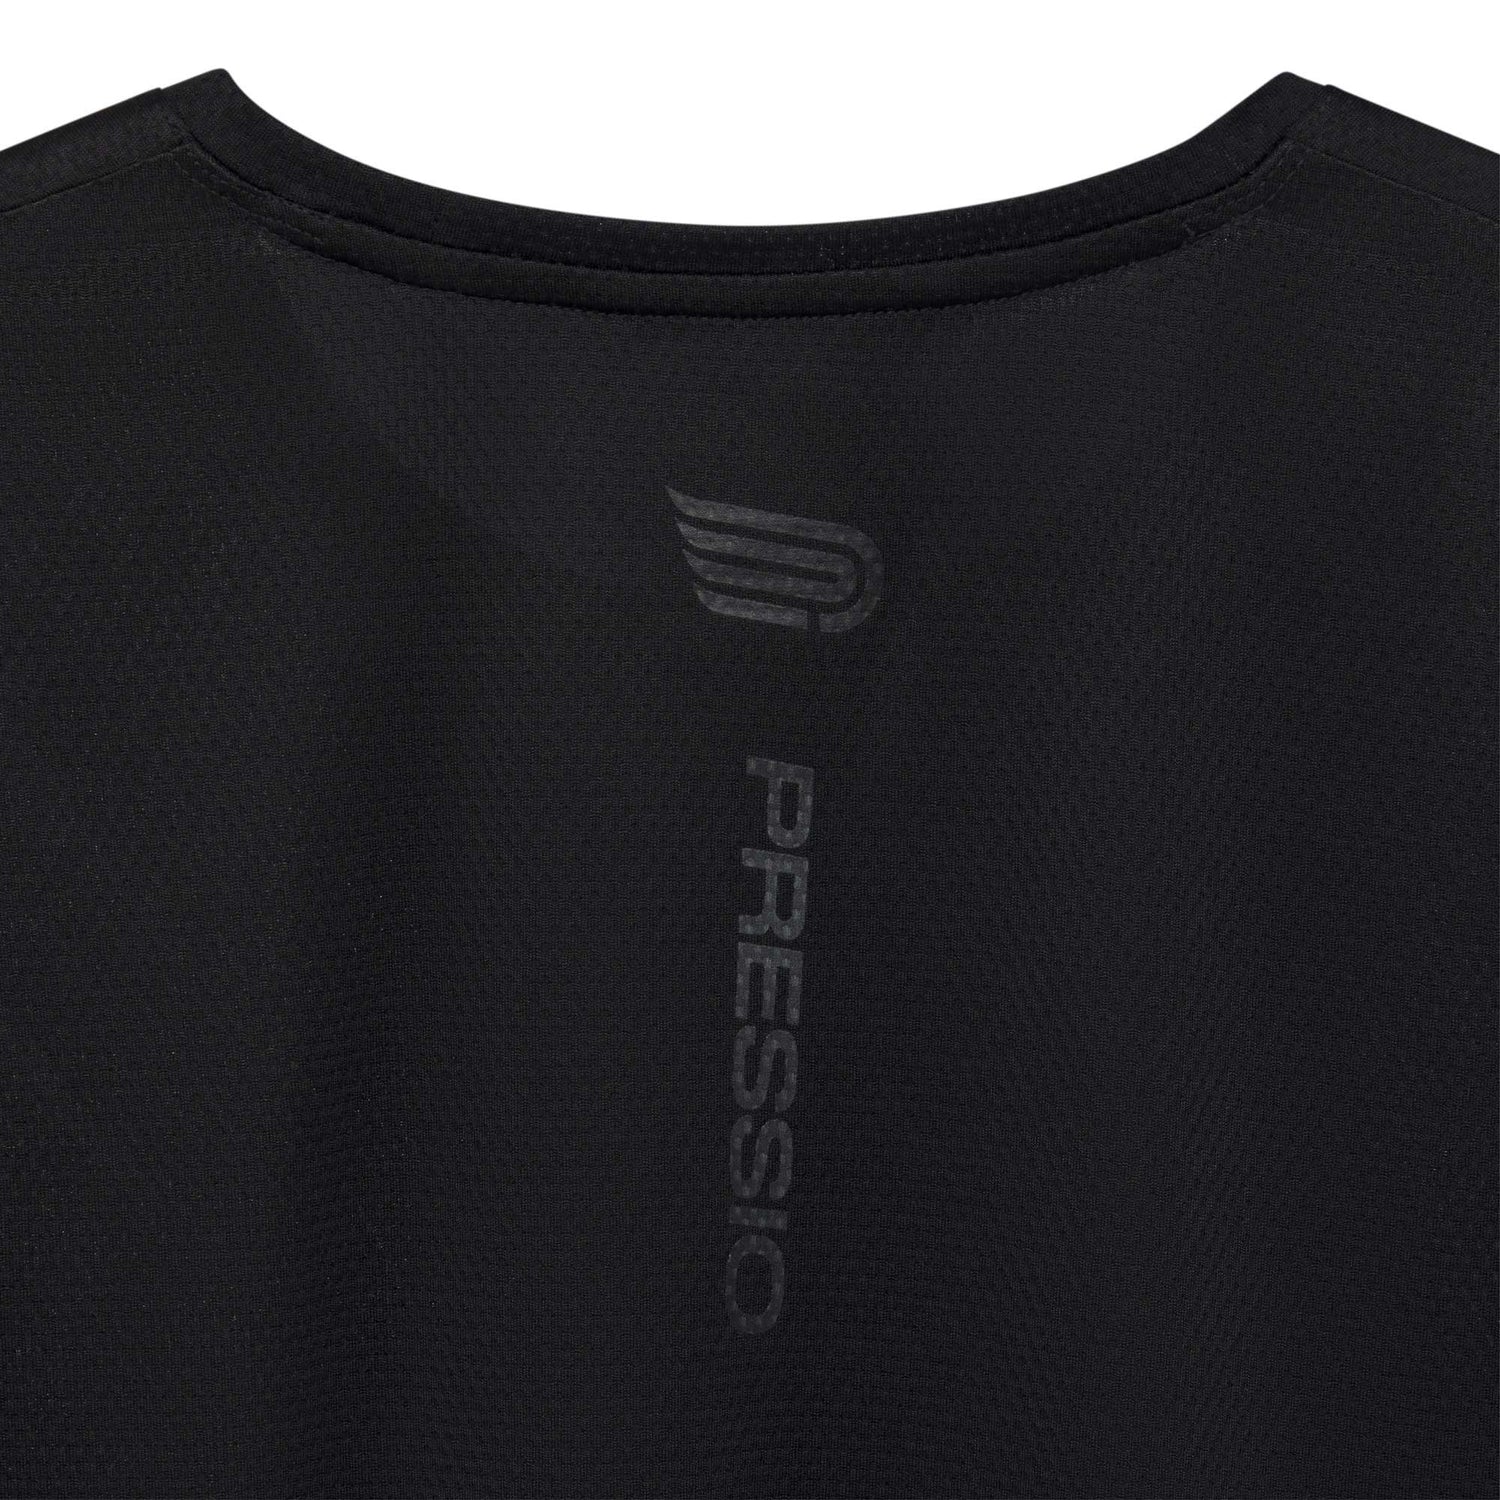 Pressio M's Hāpai Long Sleeve Top - Recycled Polyester Black Matte Shirt